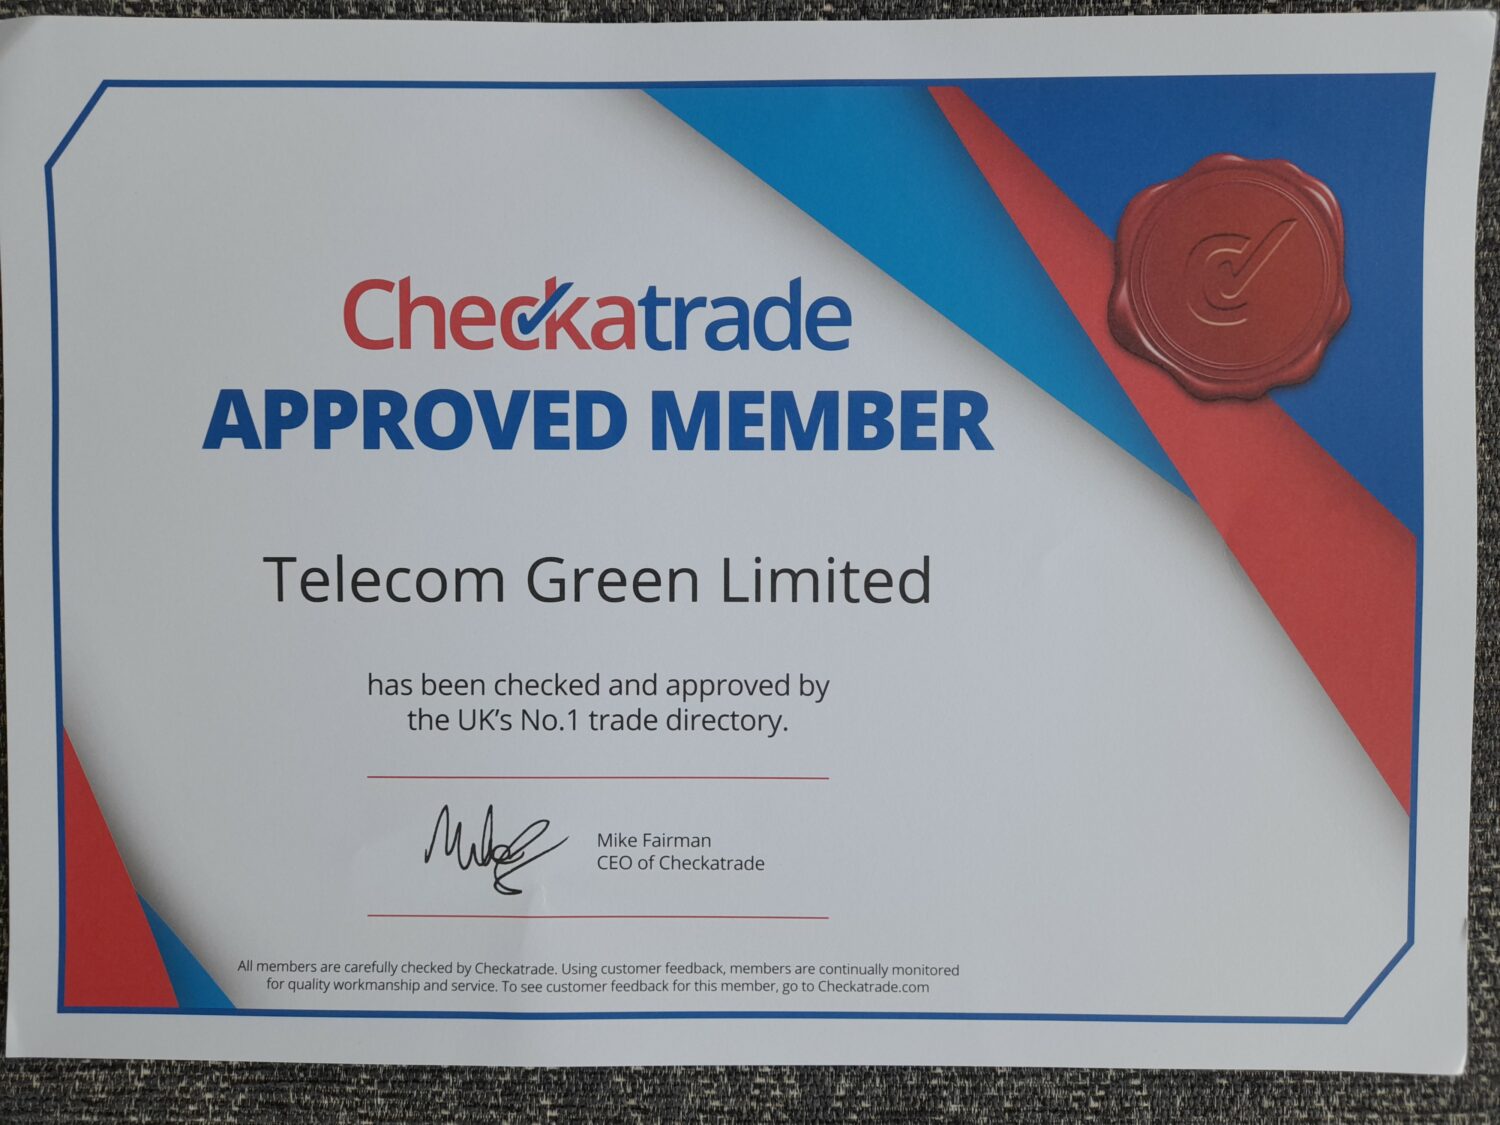 A Checkatrade-Approved Phone Engineer in The North East!